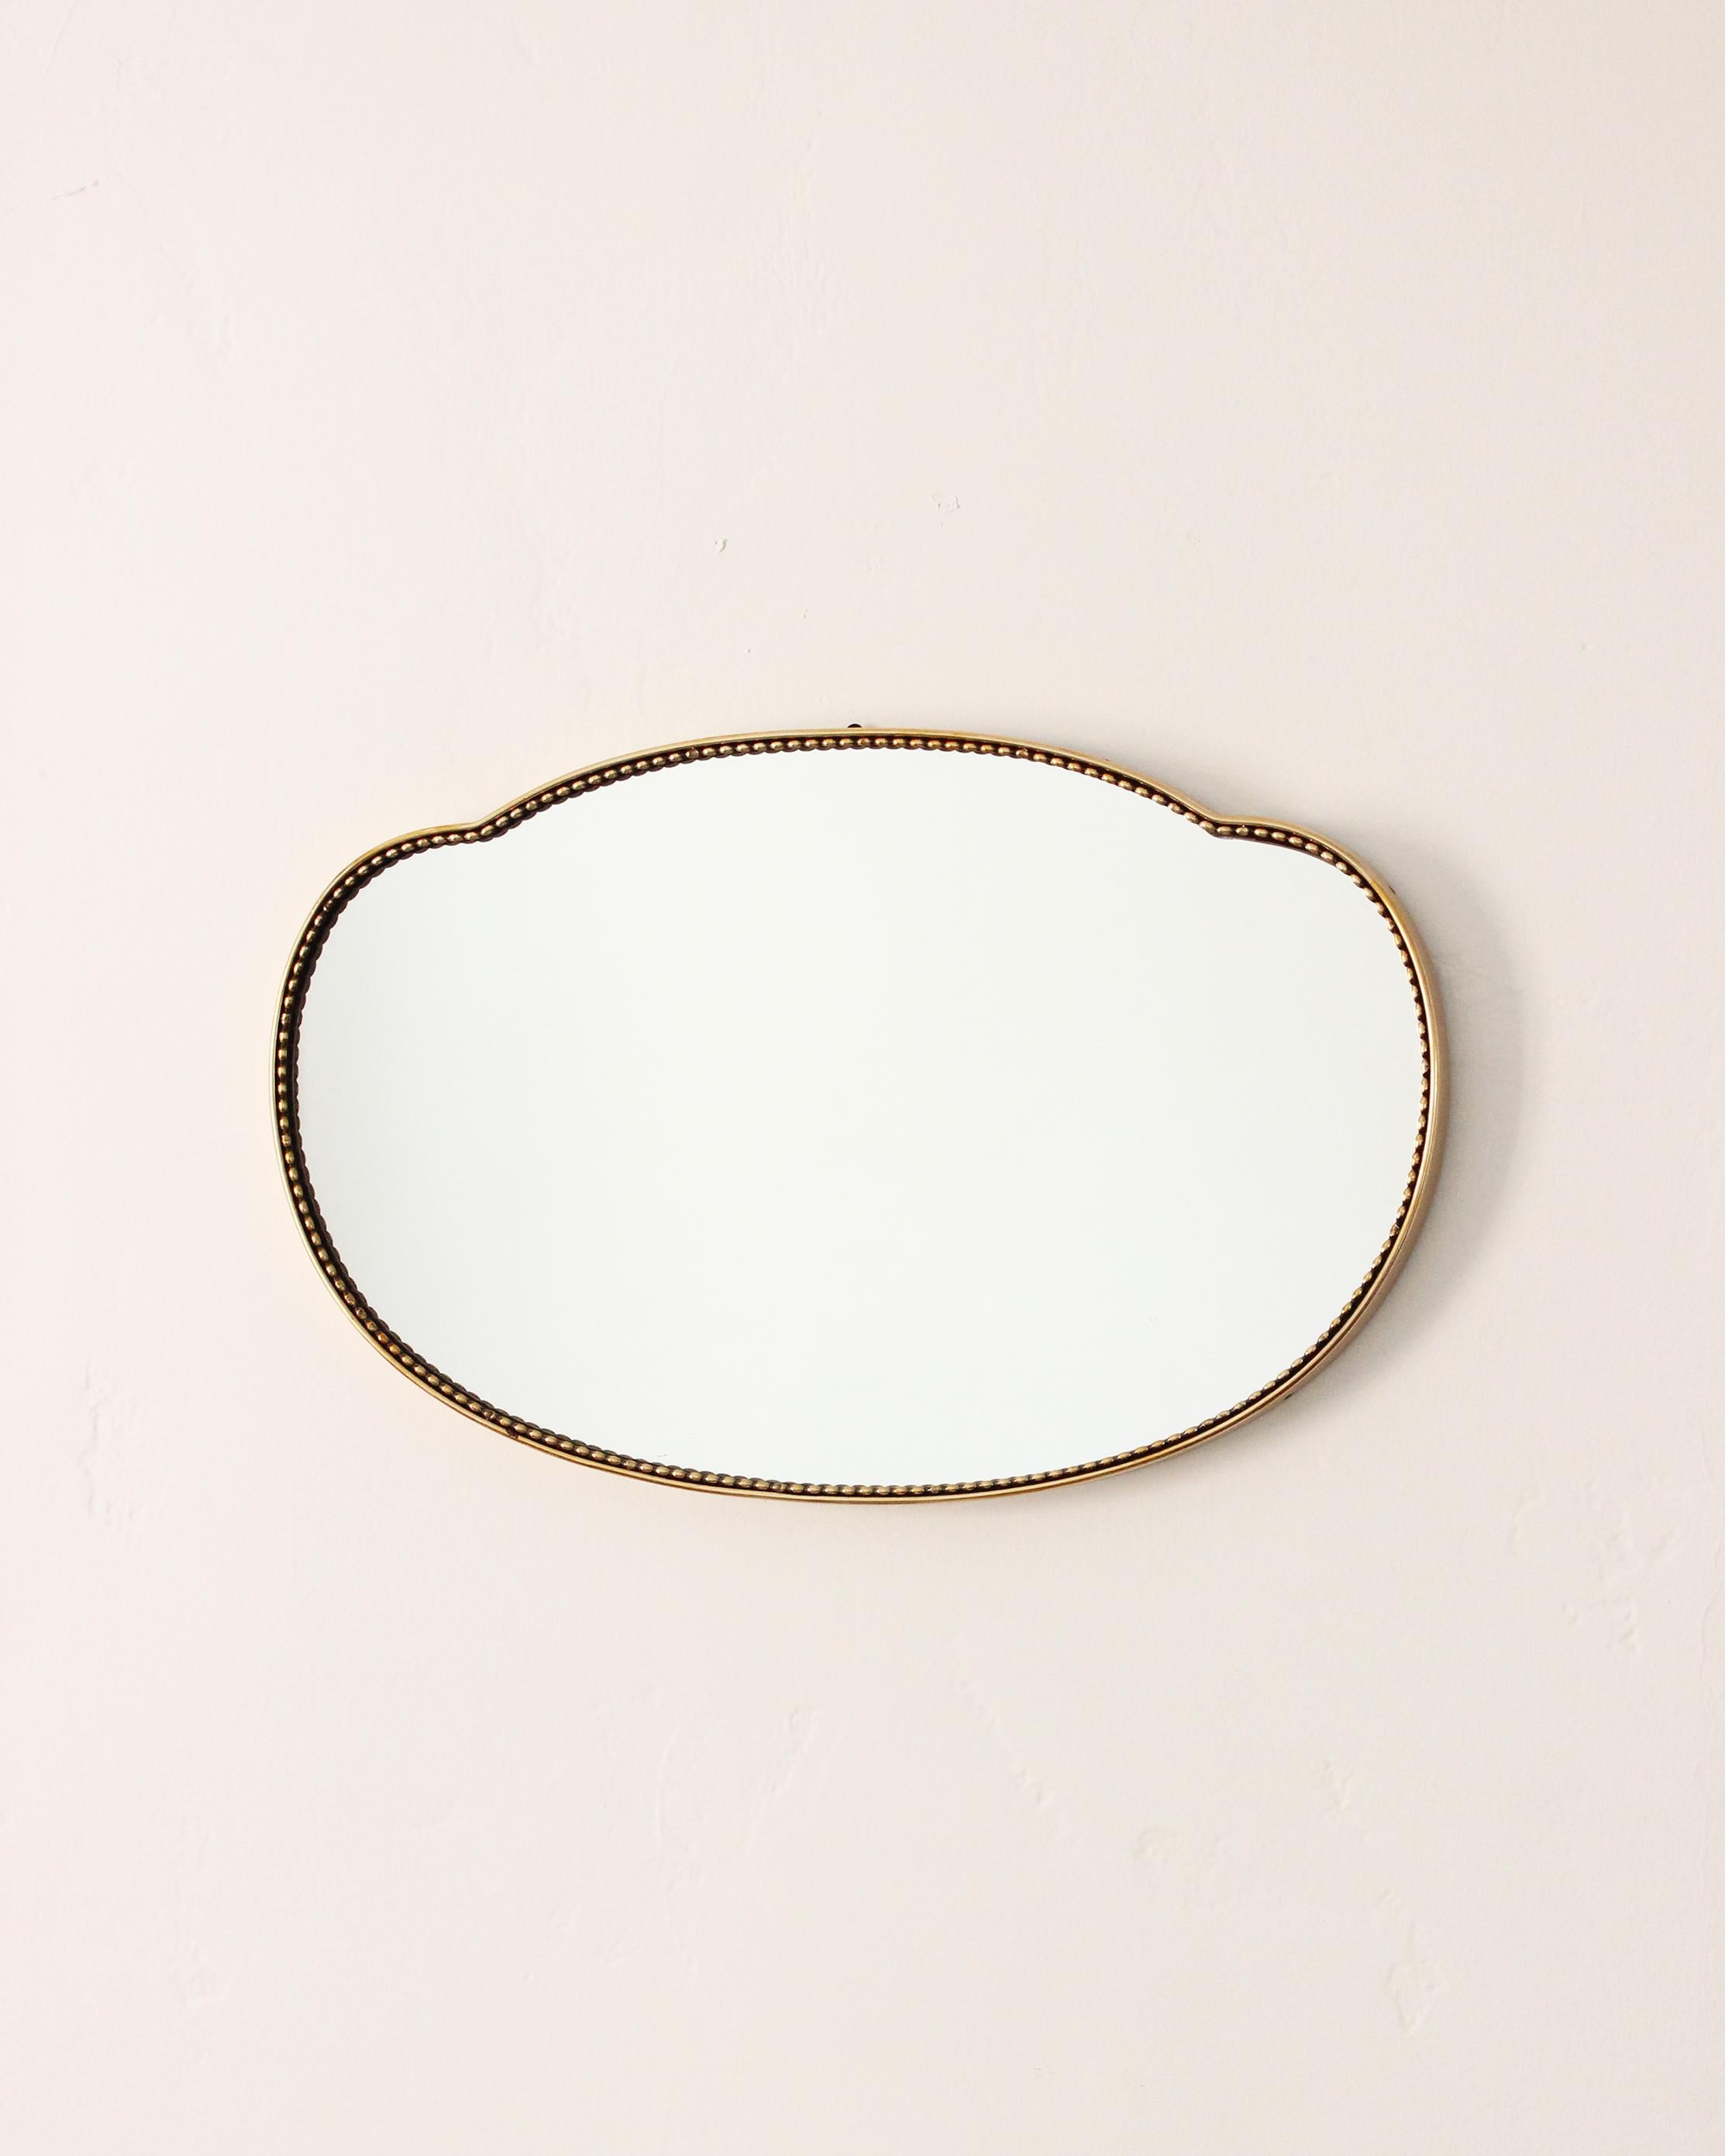 Organic wall mirror in the bean shape, produced in Italy, 1950s. Organically cut mirror glass is framed brass.

Other designers of the period include Gio Ponti, Fontana Arte, Max Ingrand, Franco Albini, and Josef Frank.